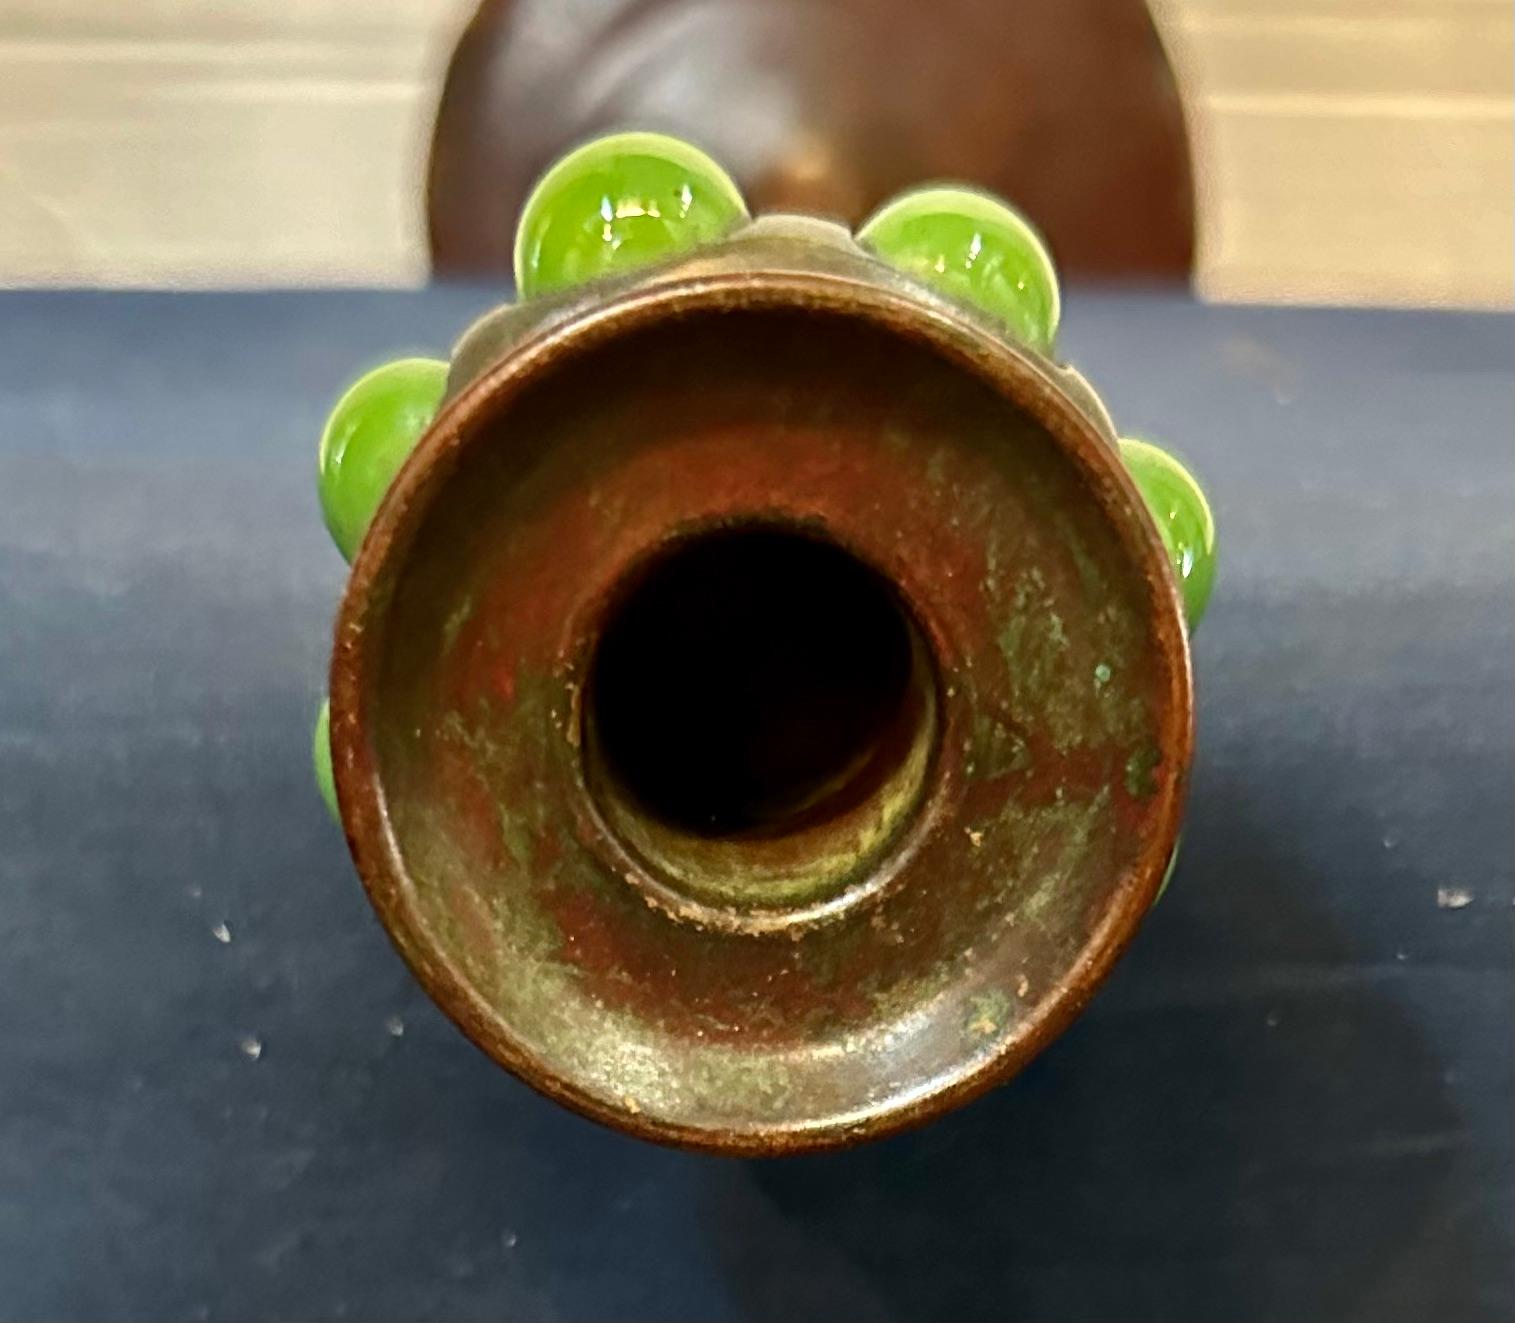 This vintage Tiffany Studios early 20th century patinated bronze candlestick features a candle cup containing ovoid blown out green glass. This candlestick is in excellent condition. The base is stamped “21466”.